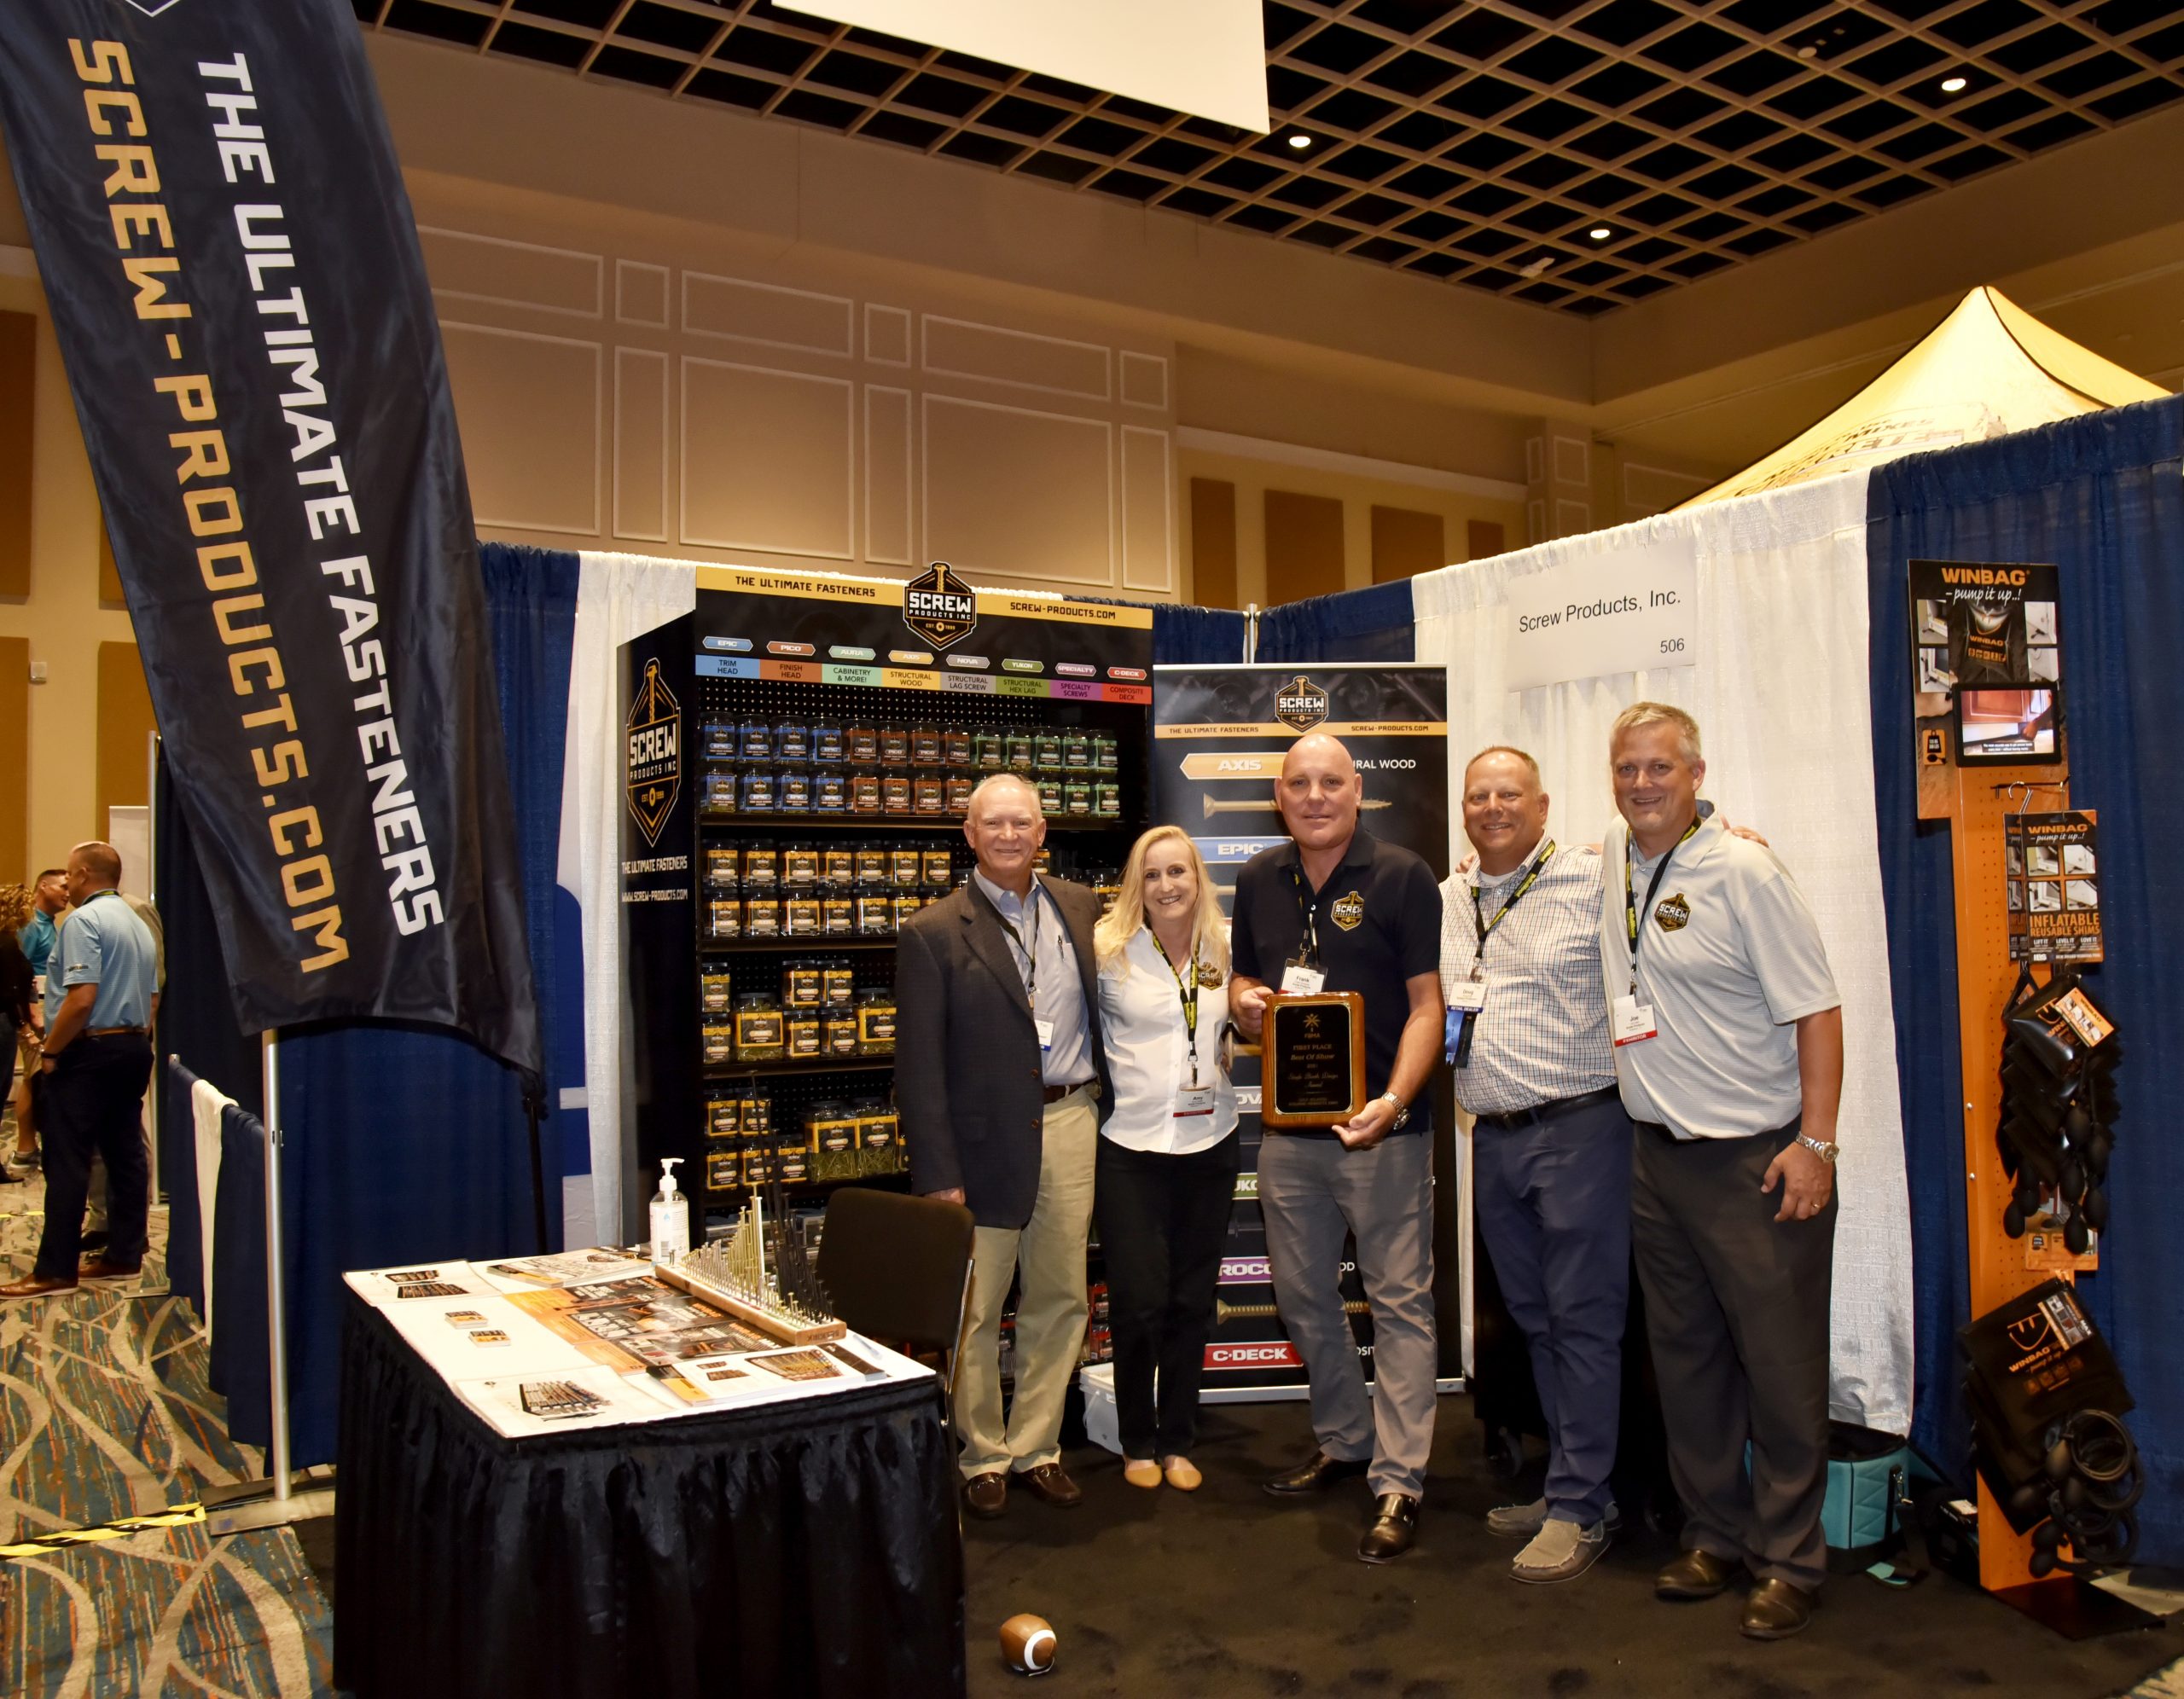 Scew Products Inc. accept an award at a FBMA event